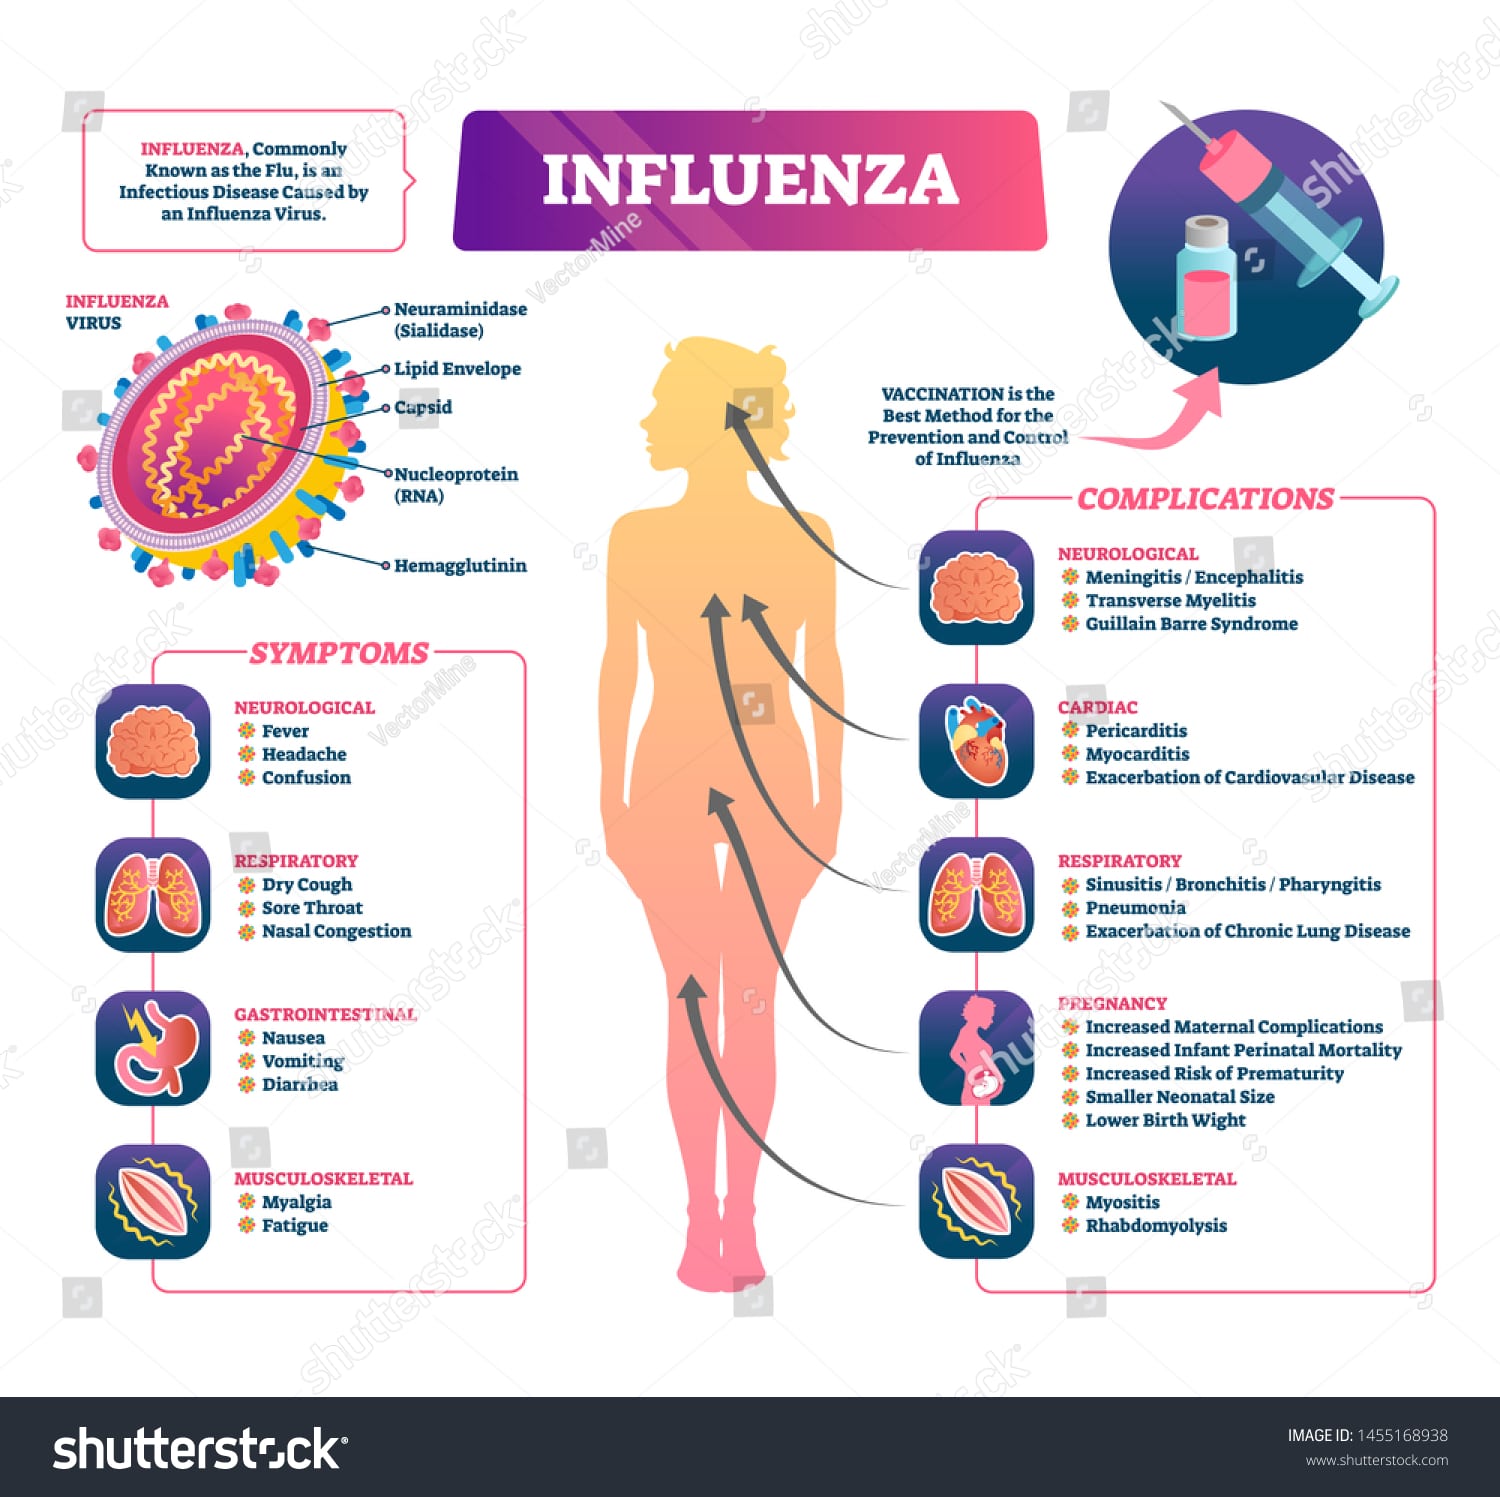 Influenza A And Diarrhea : Ness of neuraminidase inhibitors in treatment.